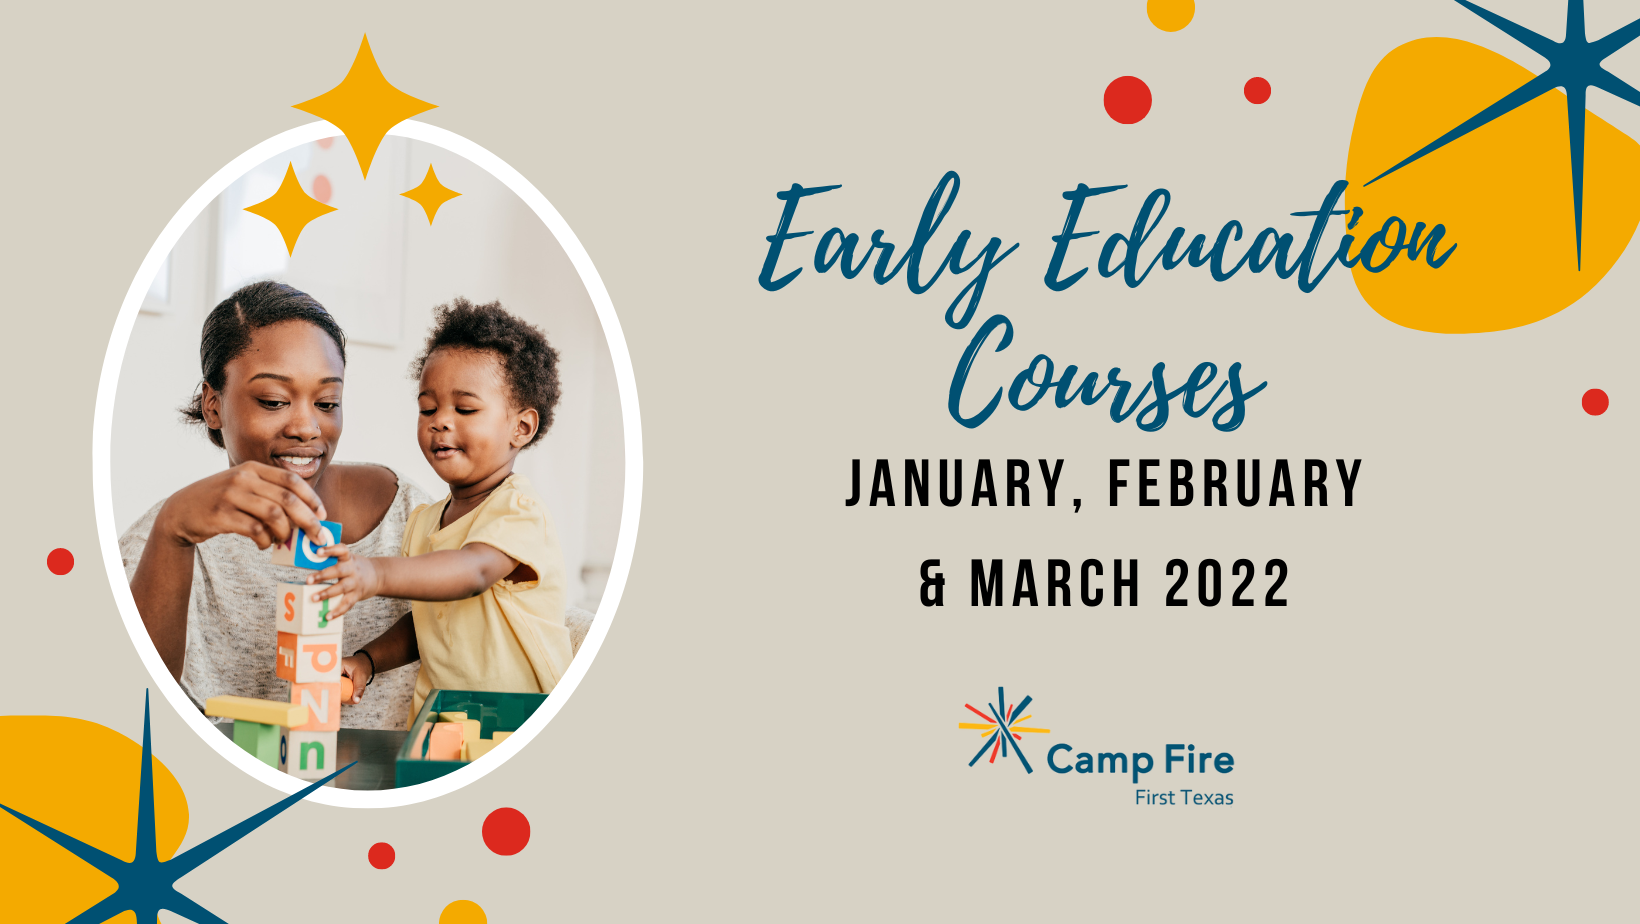 Early Education Courses: January, February & March 2022, a Camp Fire First Texas blog